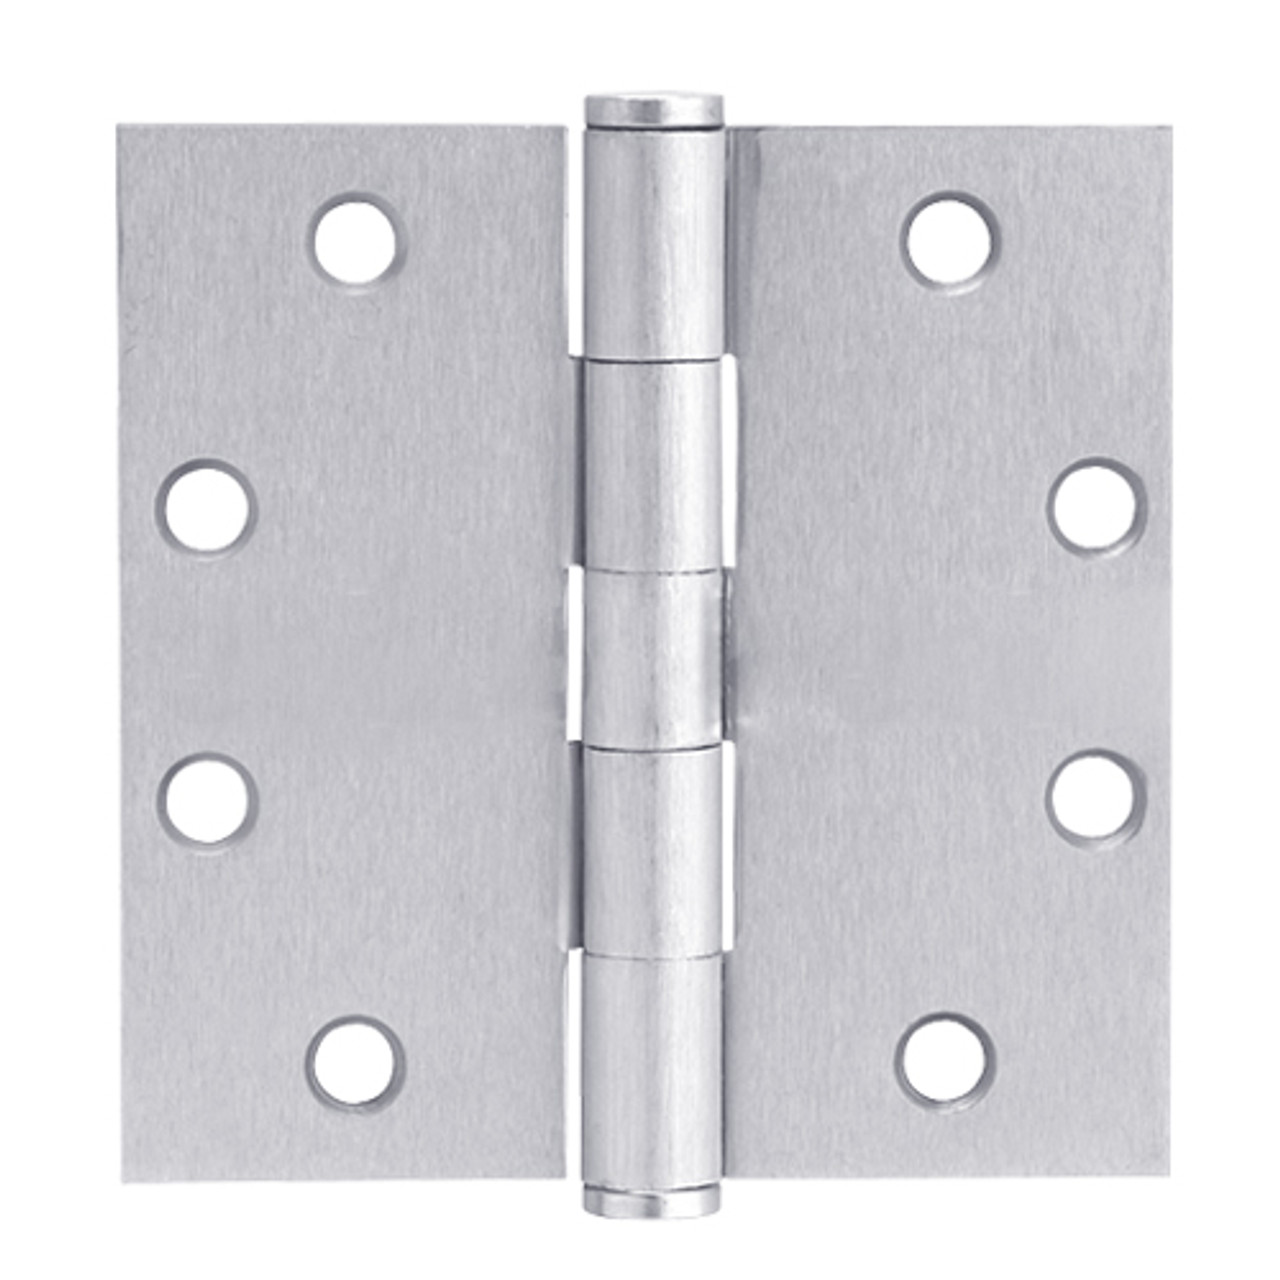 5PB1-4-5x4-5-651-NRP IVES 5 Knuckle Plain Bearing Full Mortise Hinge in Bright Chrome Plated